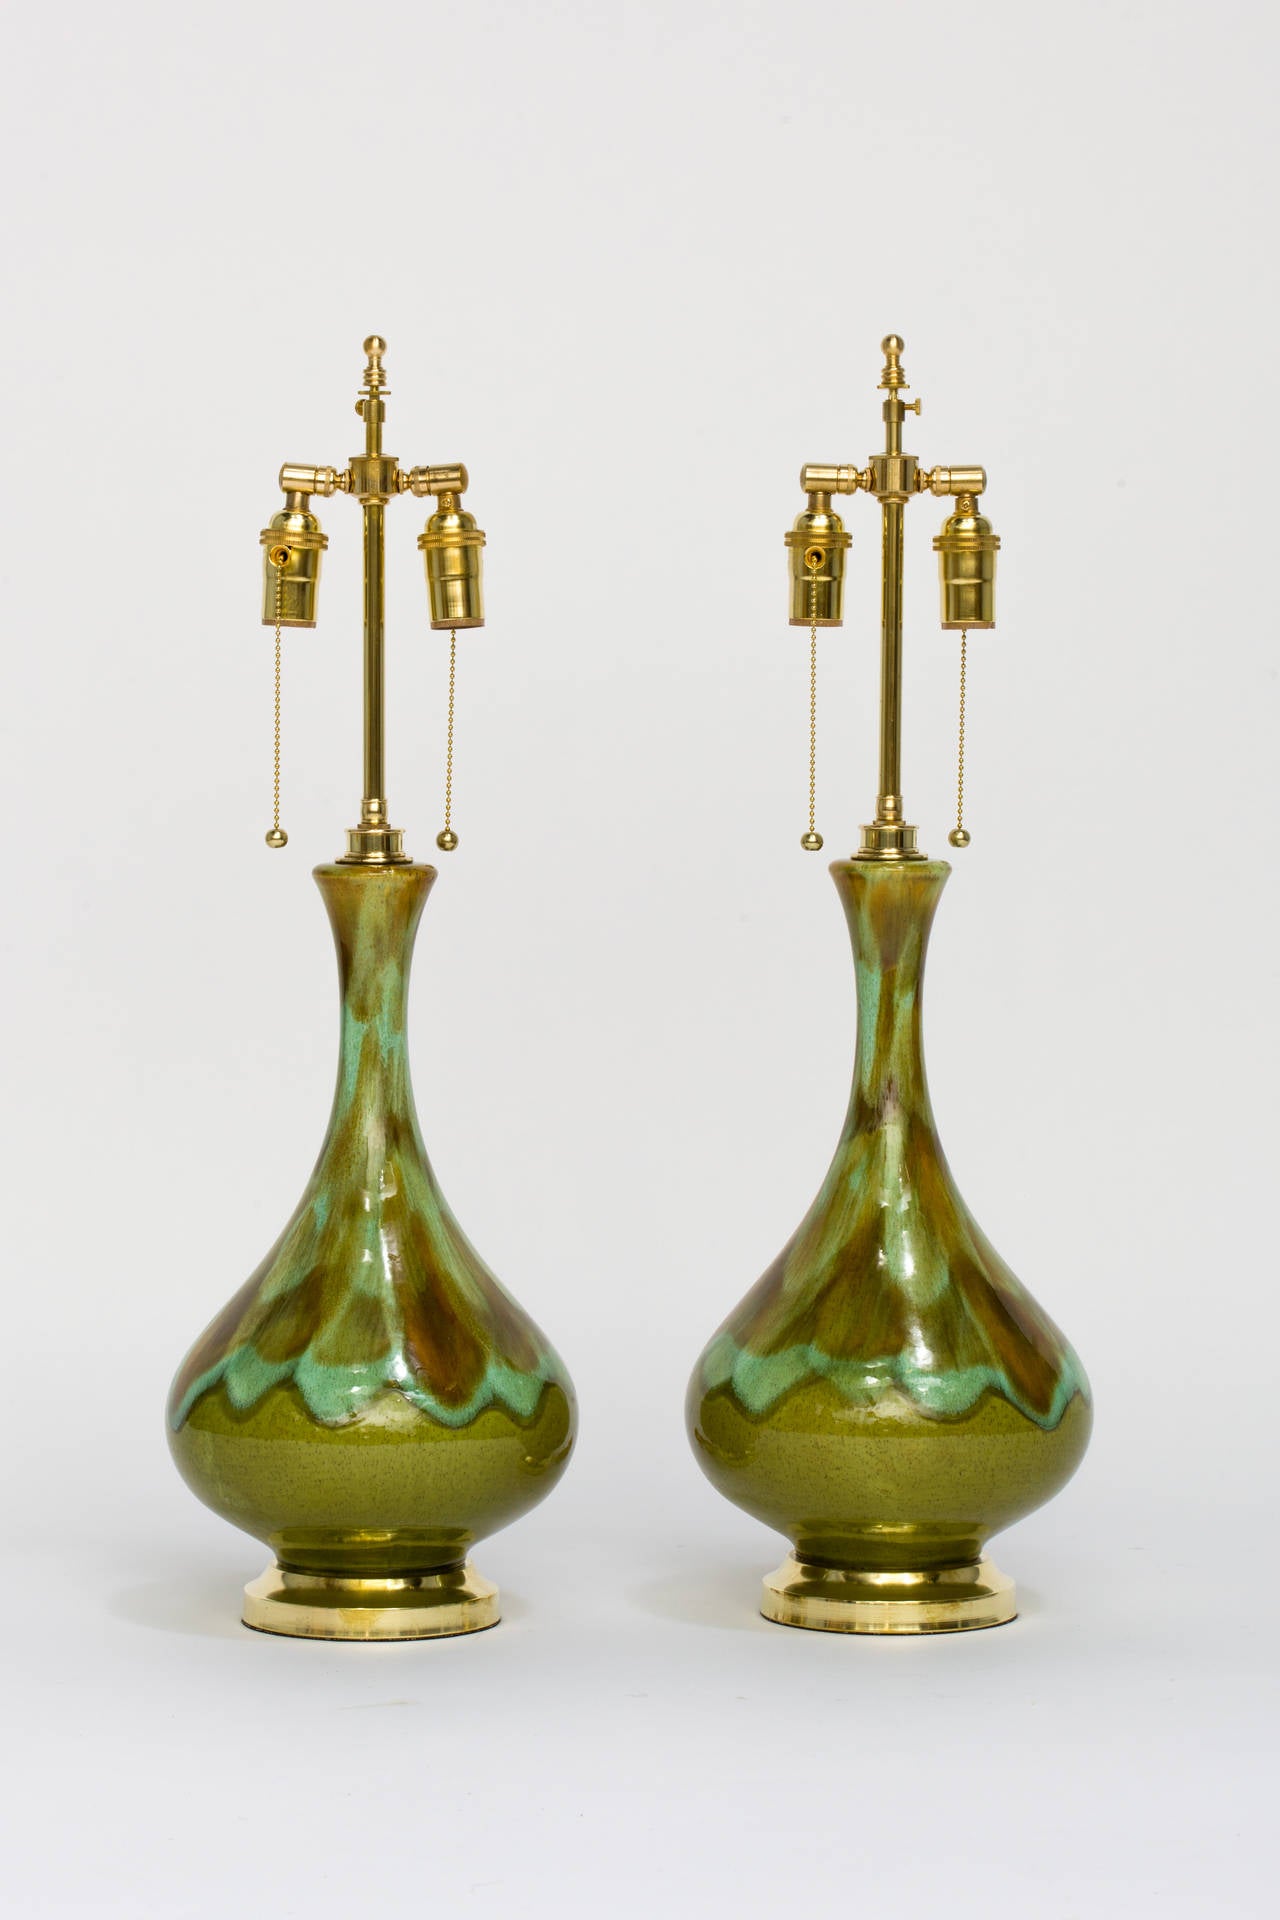 Green glazed ceramic lamps with solid brass hardware. Restored and rewired.